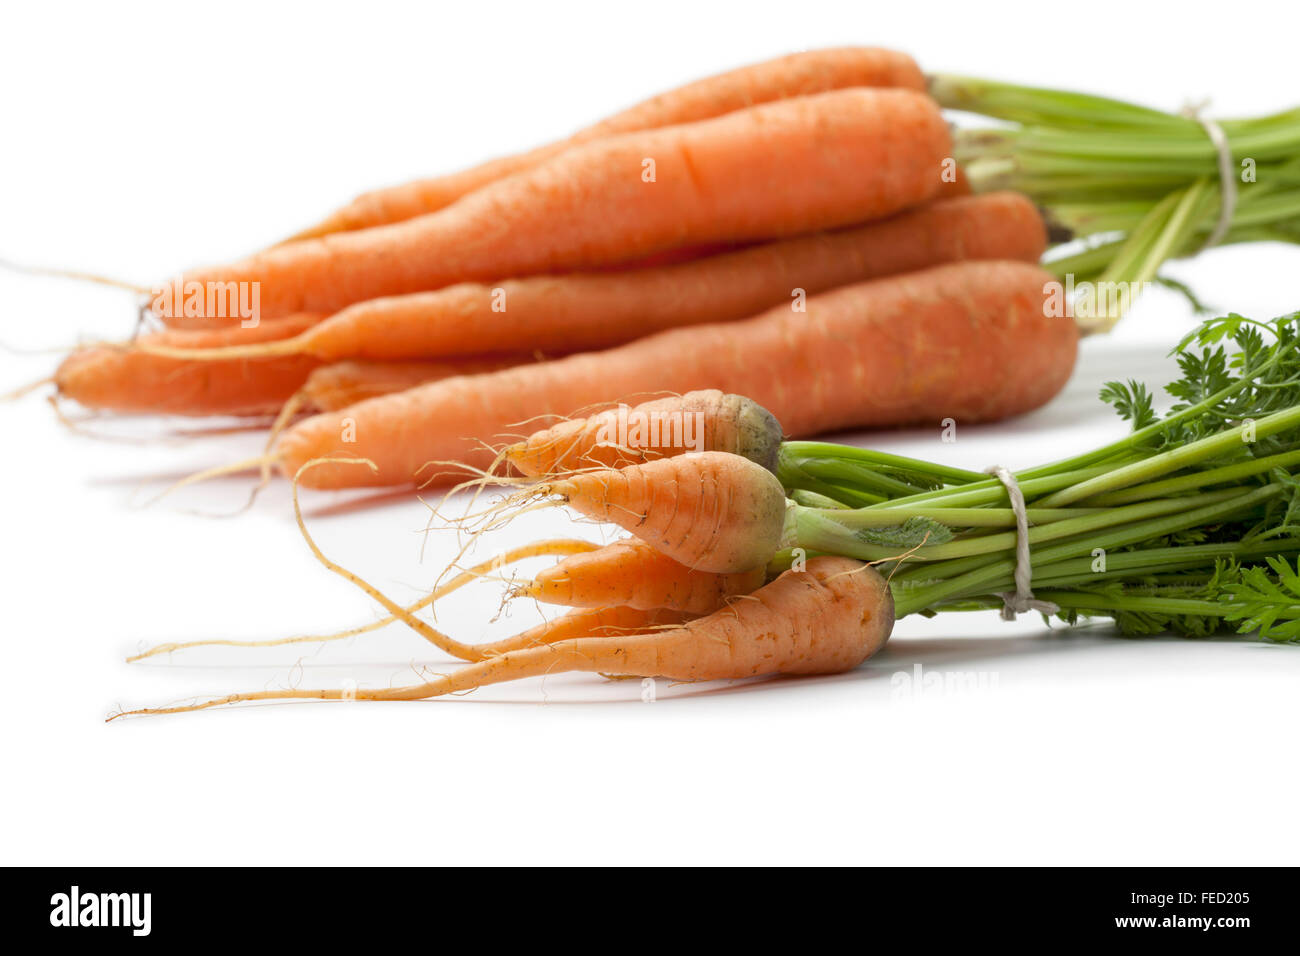 Fresh baby carrots and large ones to see the difference in size close up on white background Stock Photo